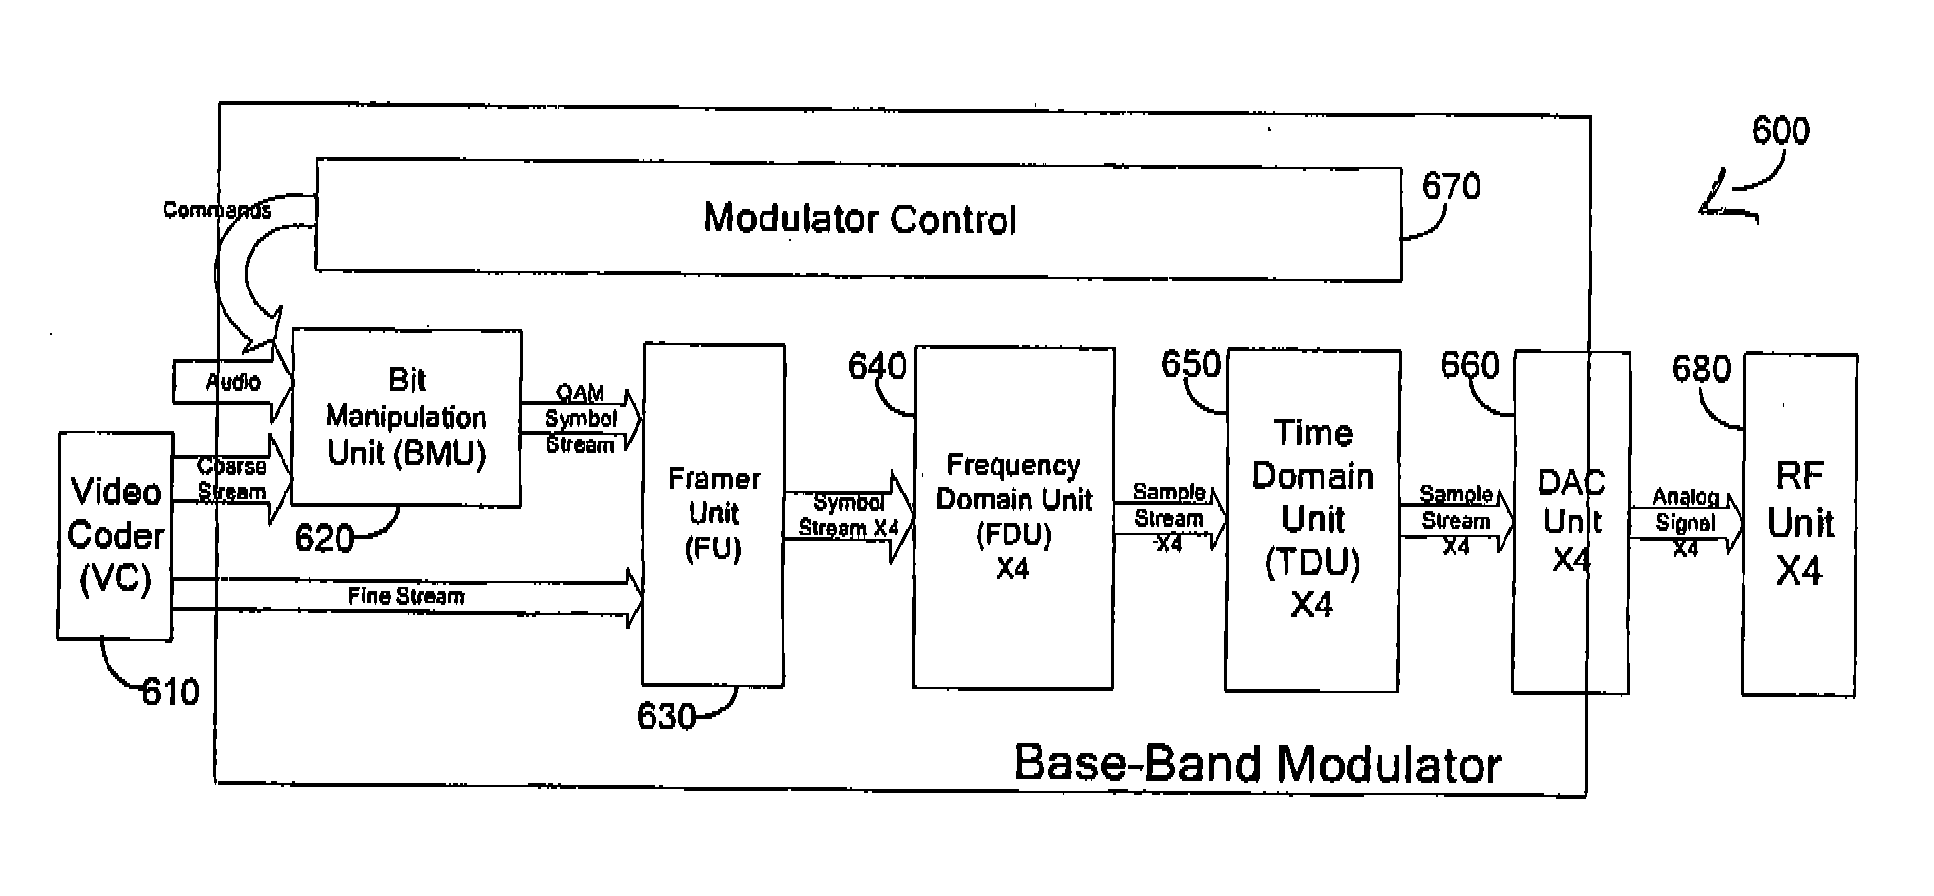 OFDM Modem for Transmission of Continuous Complex Numbers